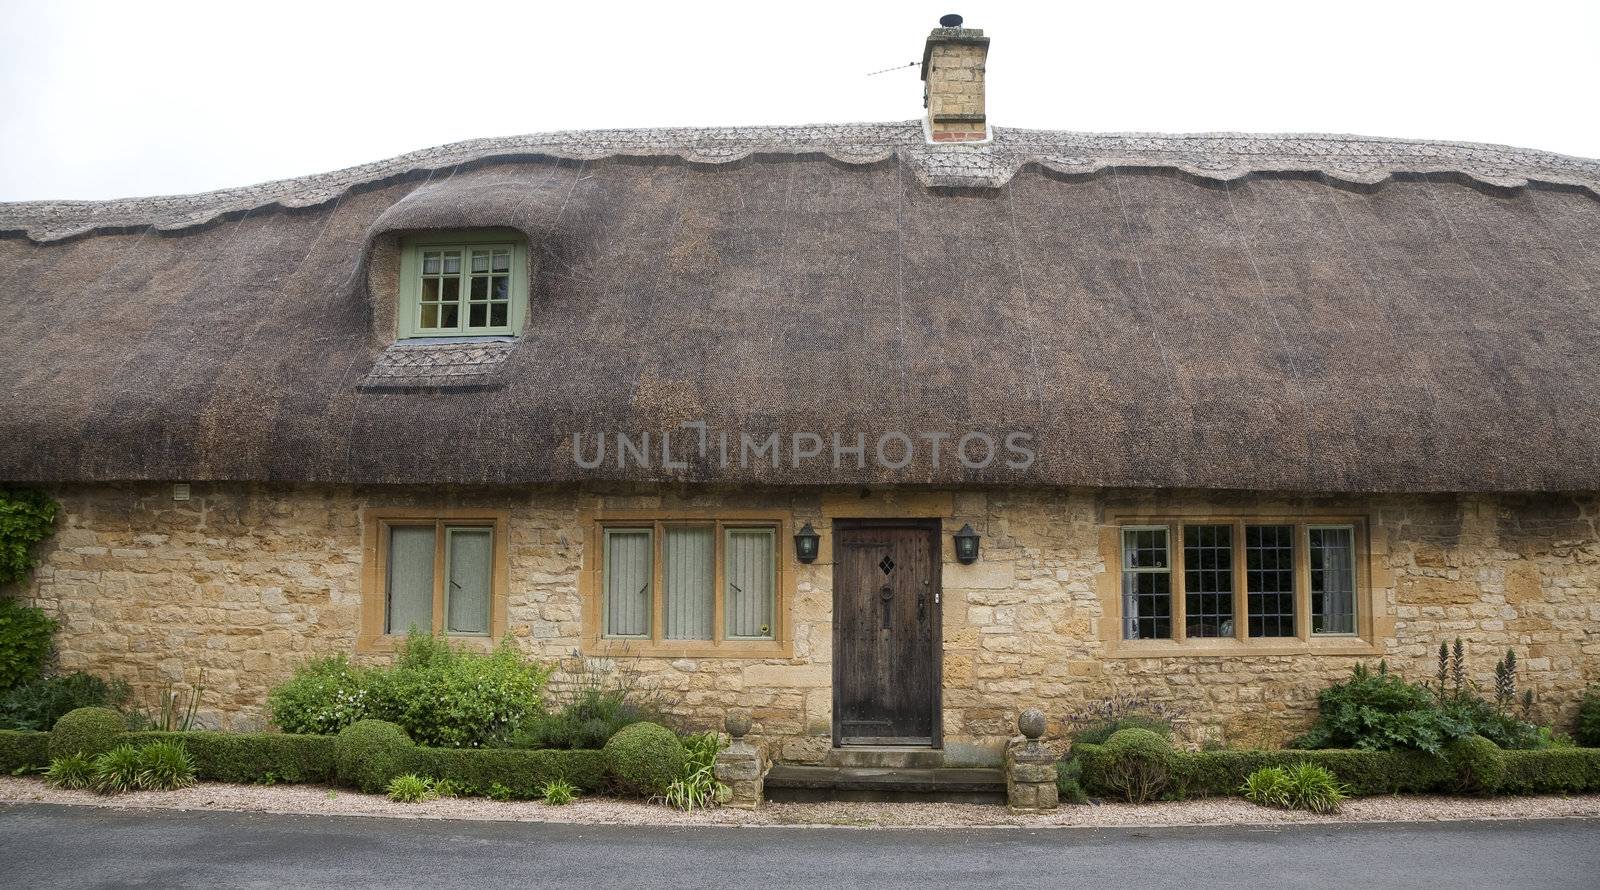 Panorama of beautiful old cottage with thatched roof in in the Cotswold area, United Kingdom.